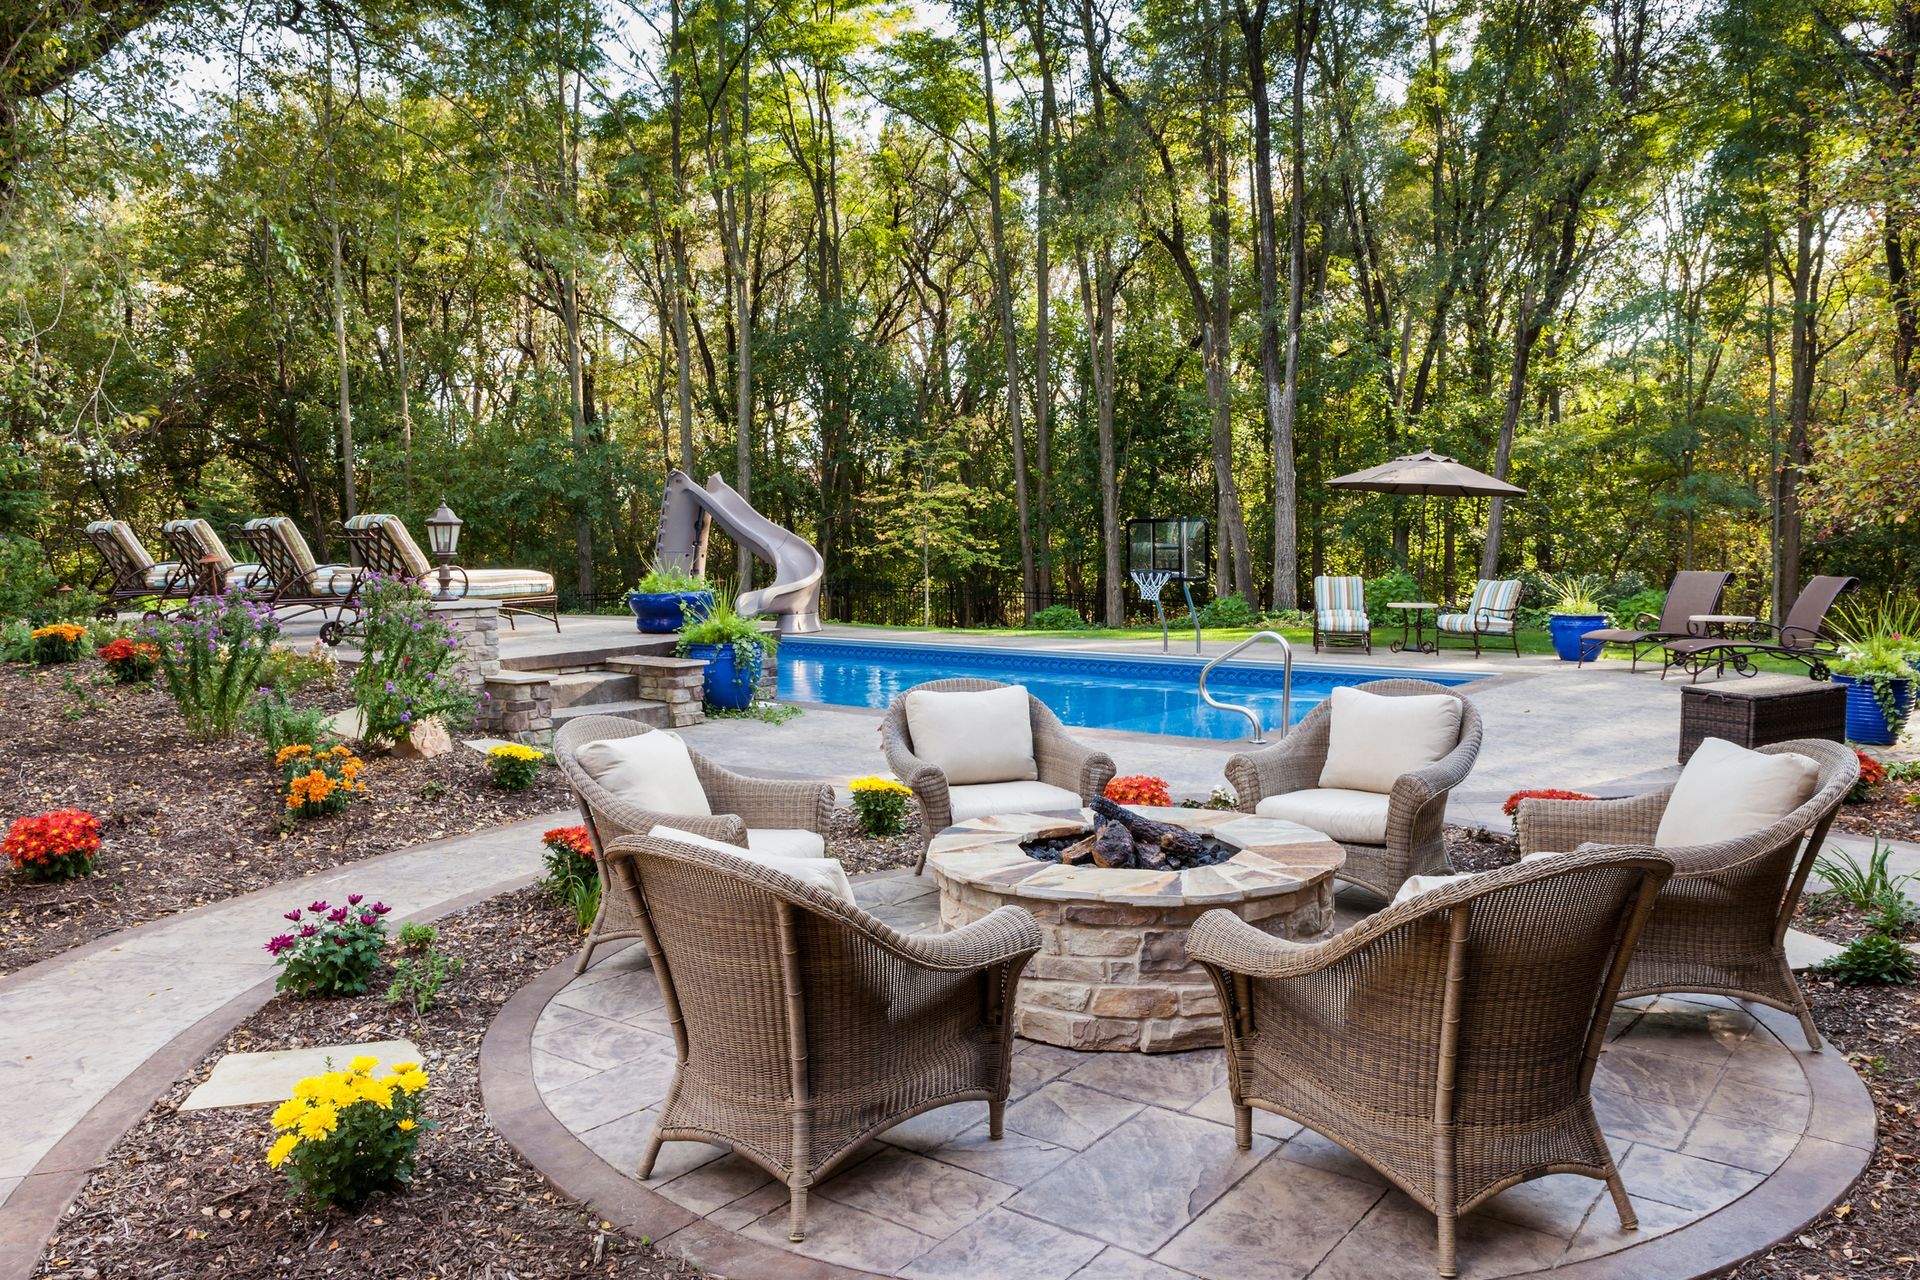 An image of a circular stamped concrete patio with fire pit with lawn chairs and swimming pool in the background  in Kent, OH